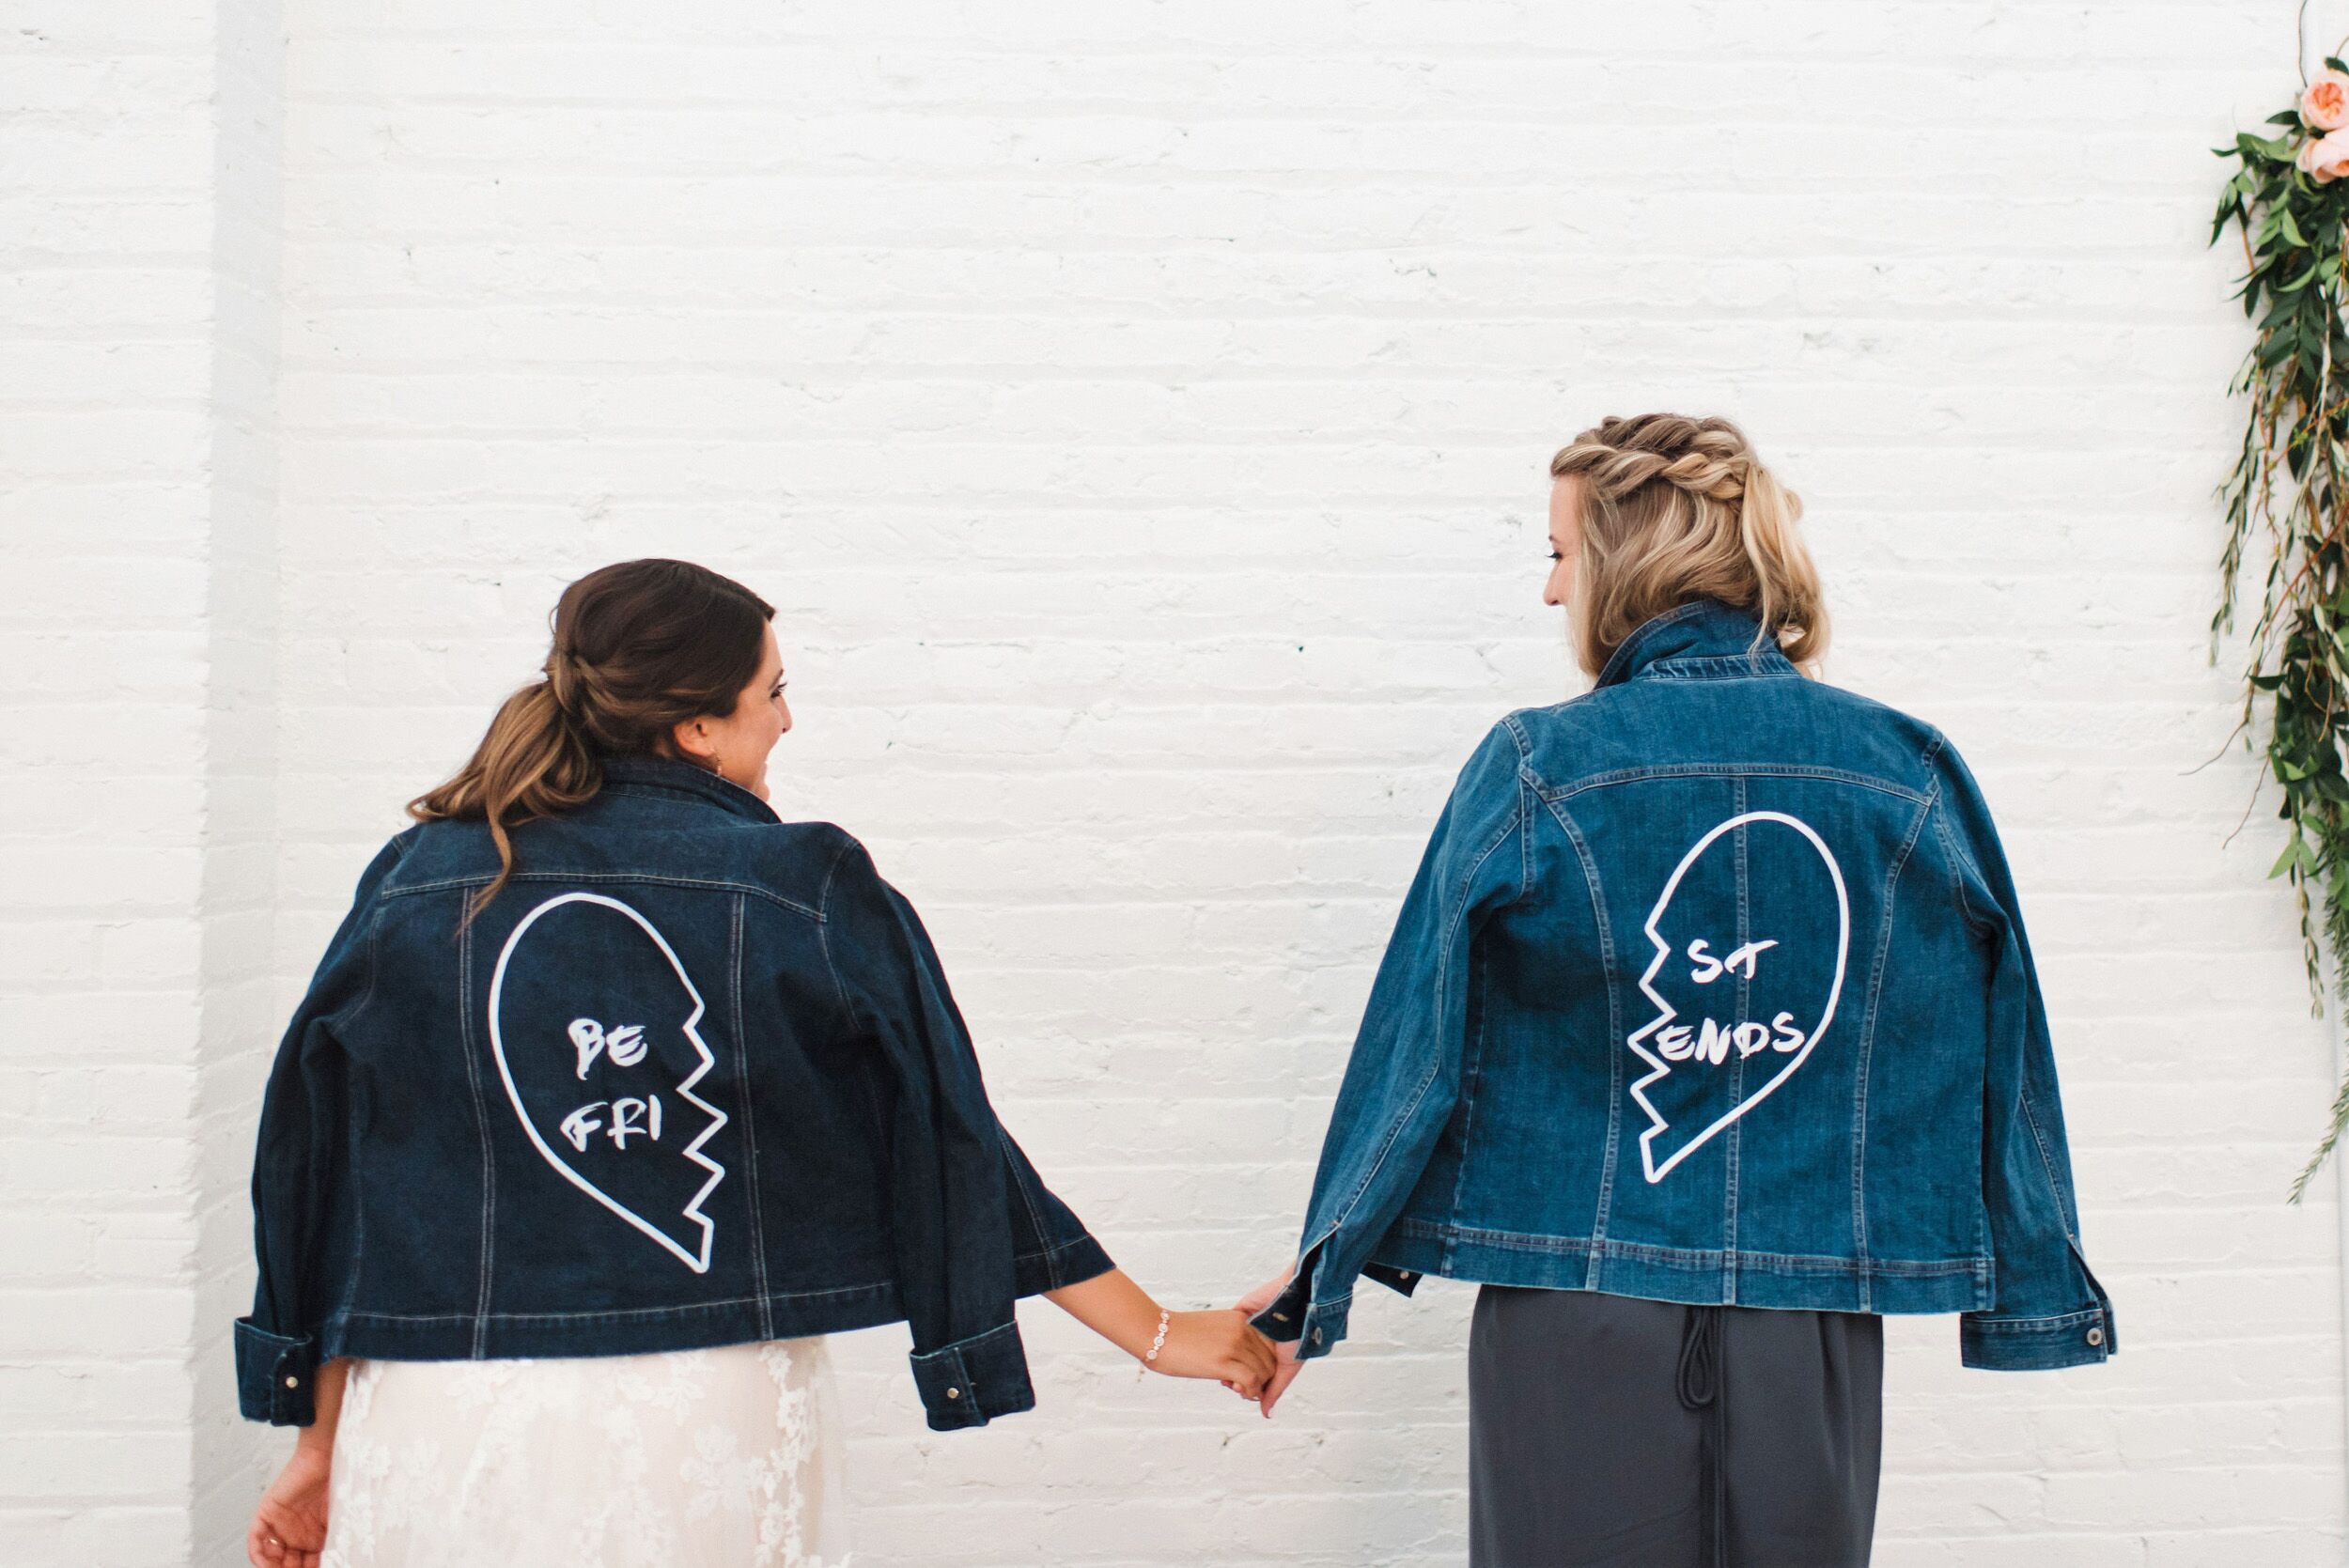 Jean Jackets For Bride And Maid Of Honor